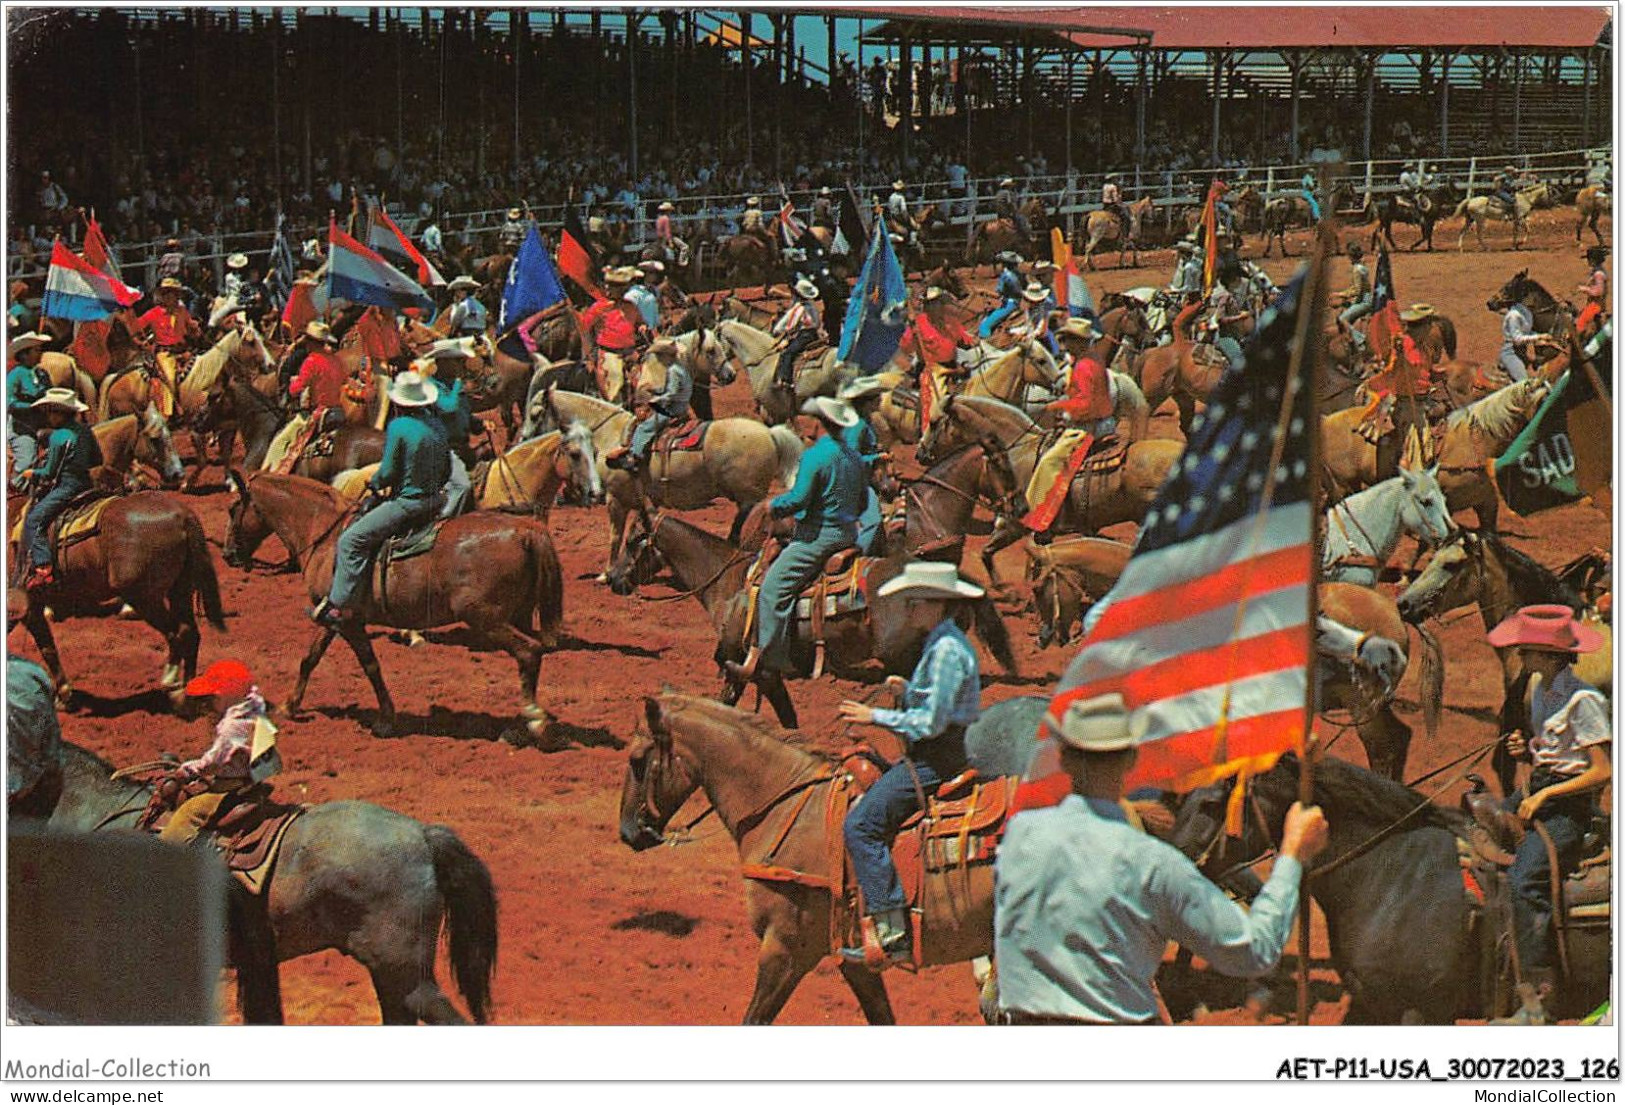 AETP11-USA-0945 - TEXAS - Texas Cowboys And Cowgirls - Compete In Rodeo Grand Entry - Fort Worth